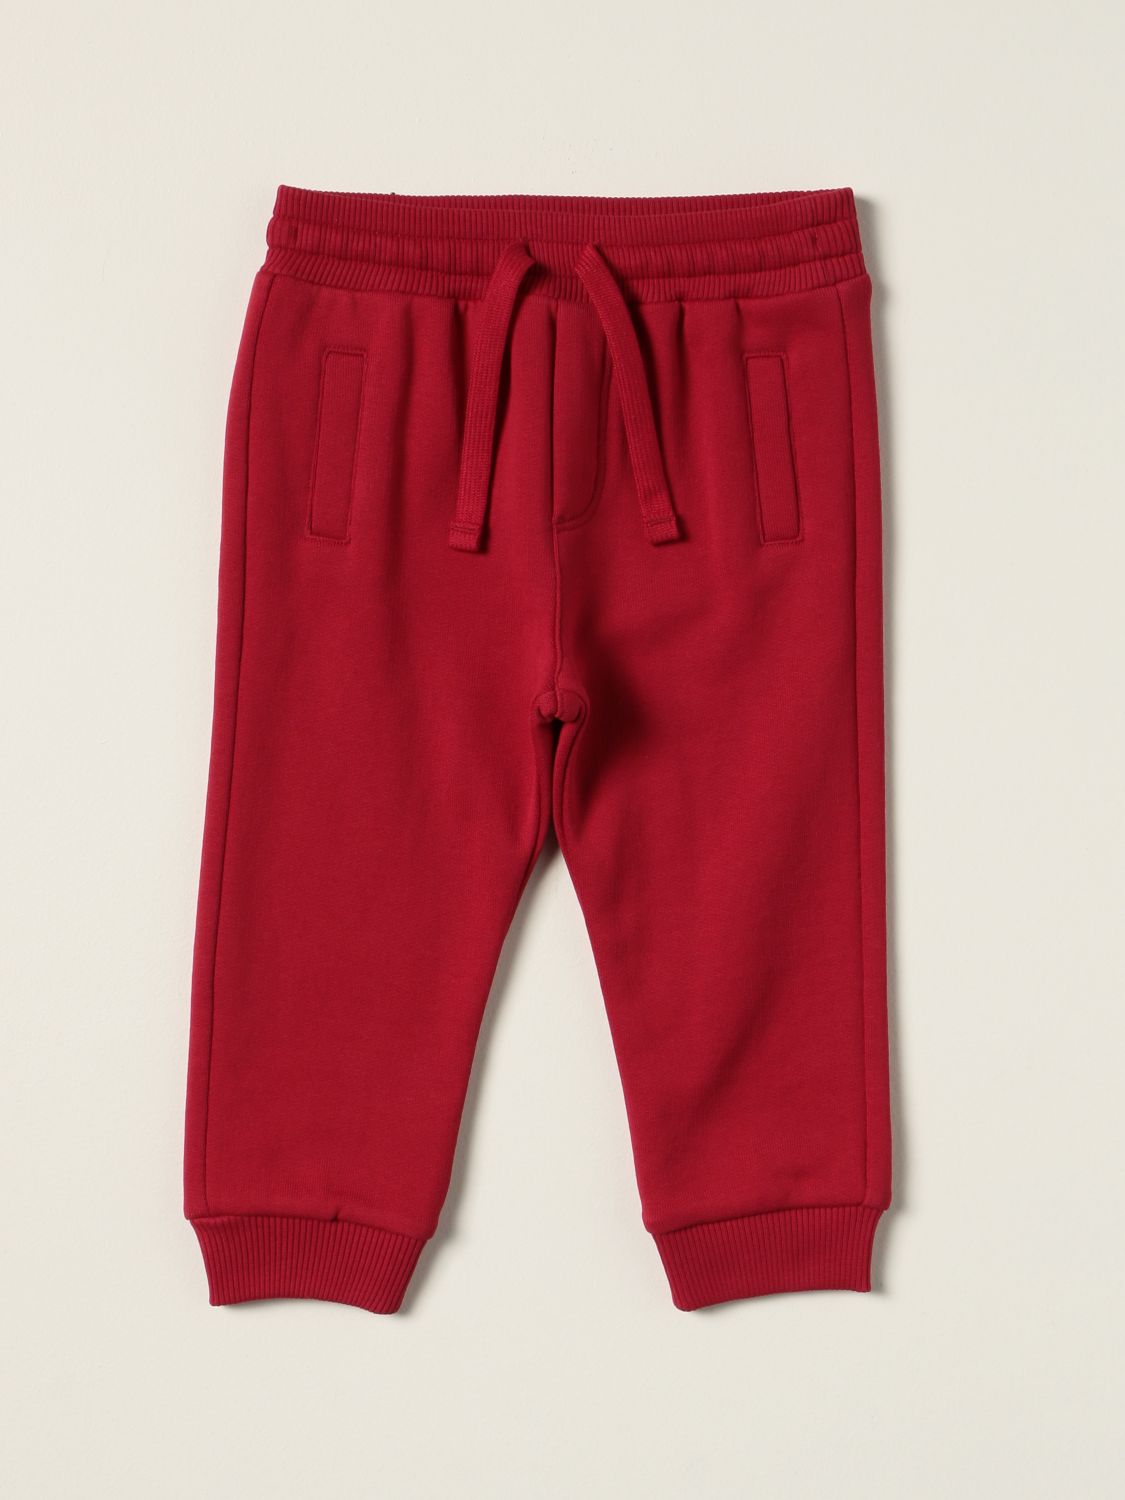 Trousers Dolce & Gabbana: Dolce & Gabbana cotton jogging trousers red 1